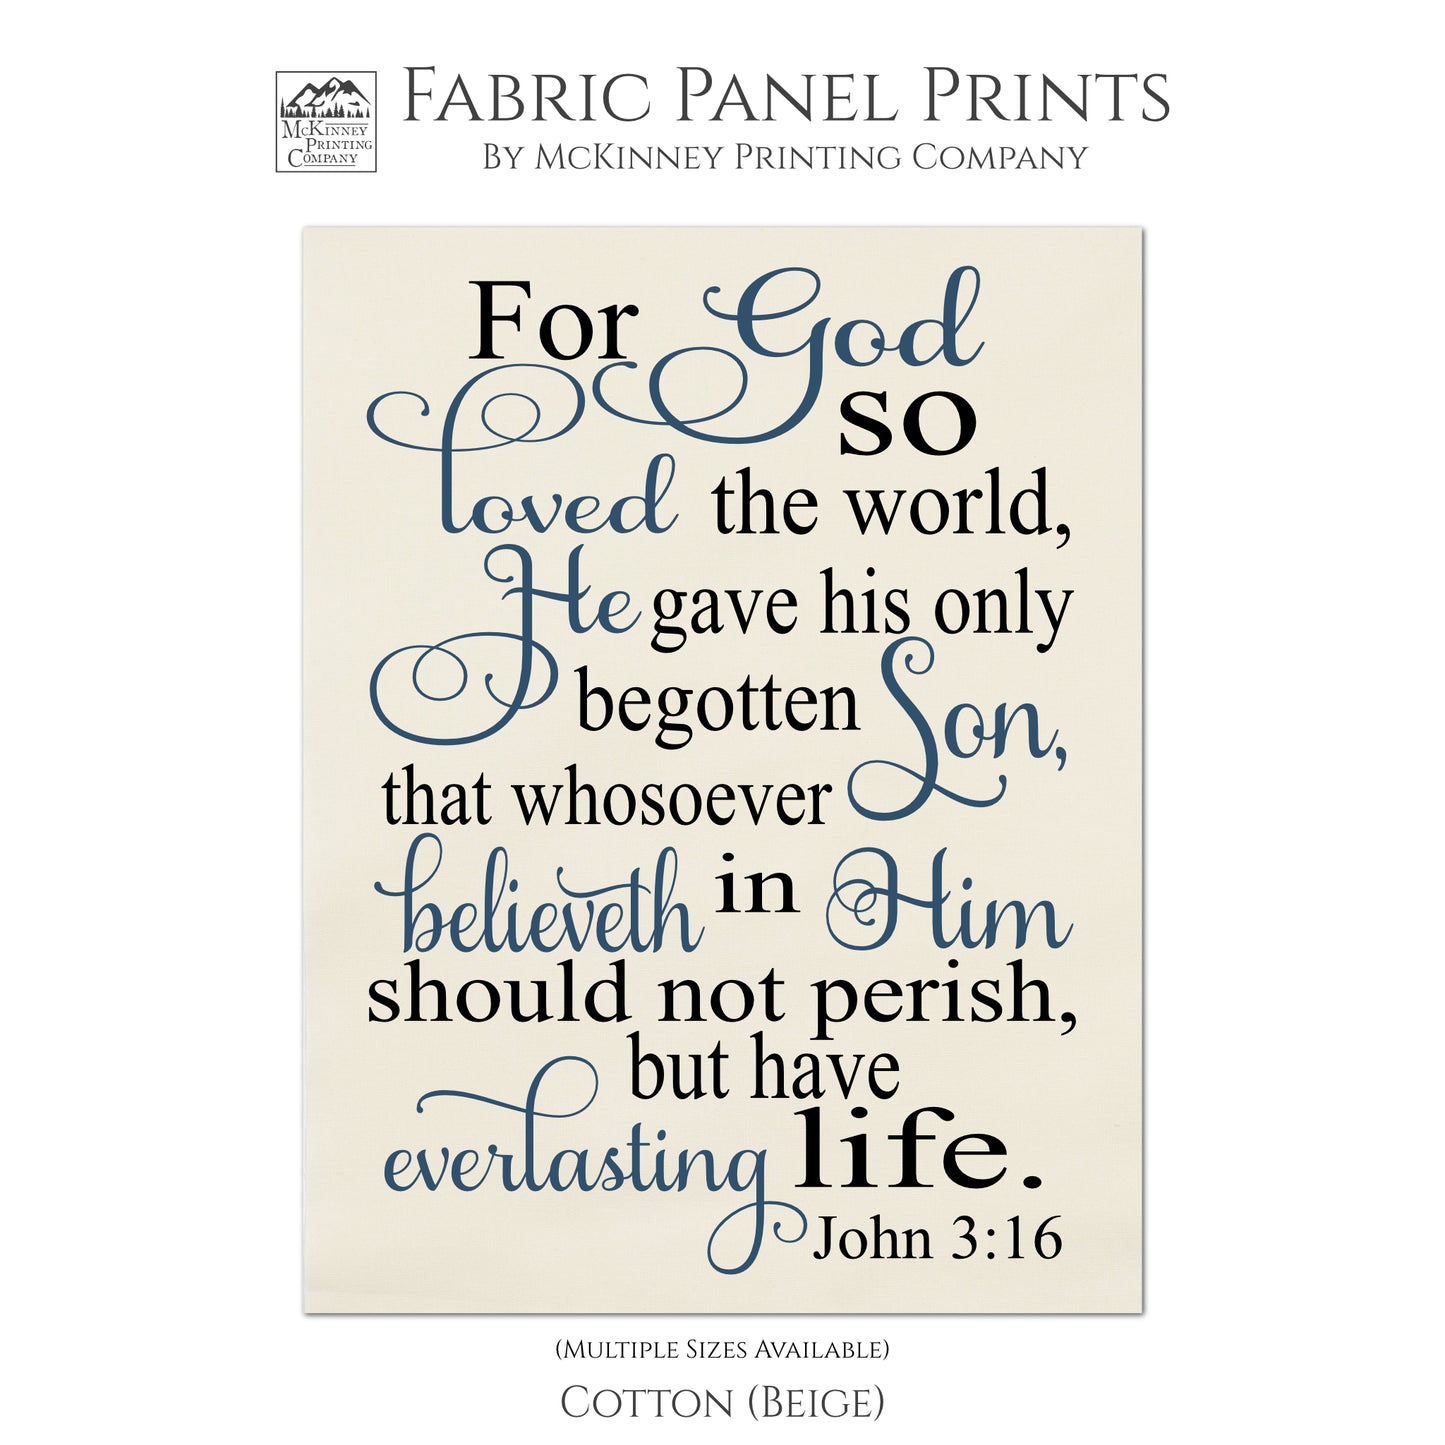 For God so loved the world, He gave his only begotten Son, that whosoever believeth in Him should not perish, but have everlasting life. John 3:16, Fabric Panel Print, Wall Hanging, Quilt Block - Cotton